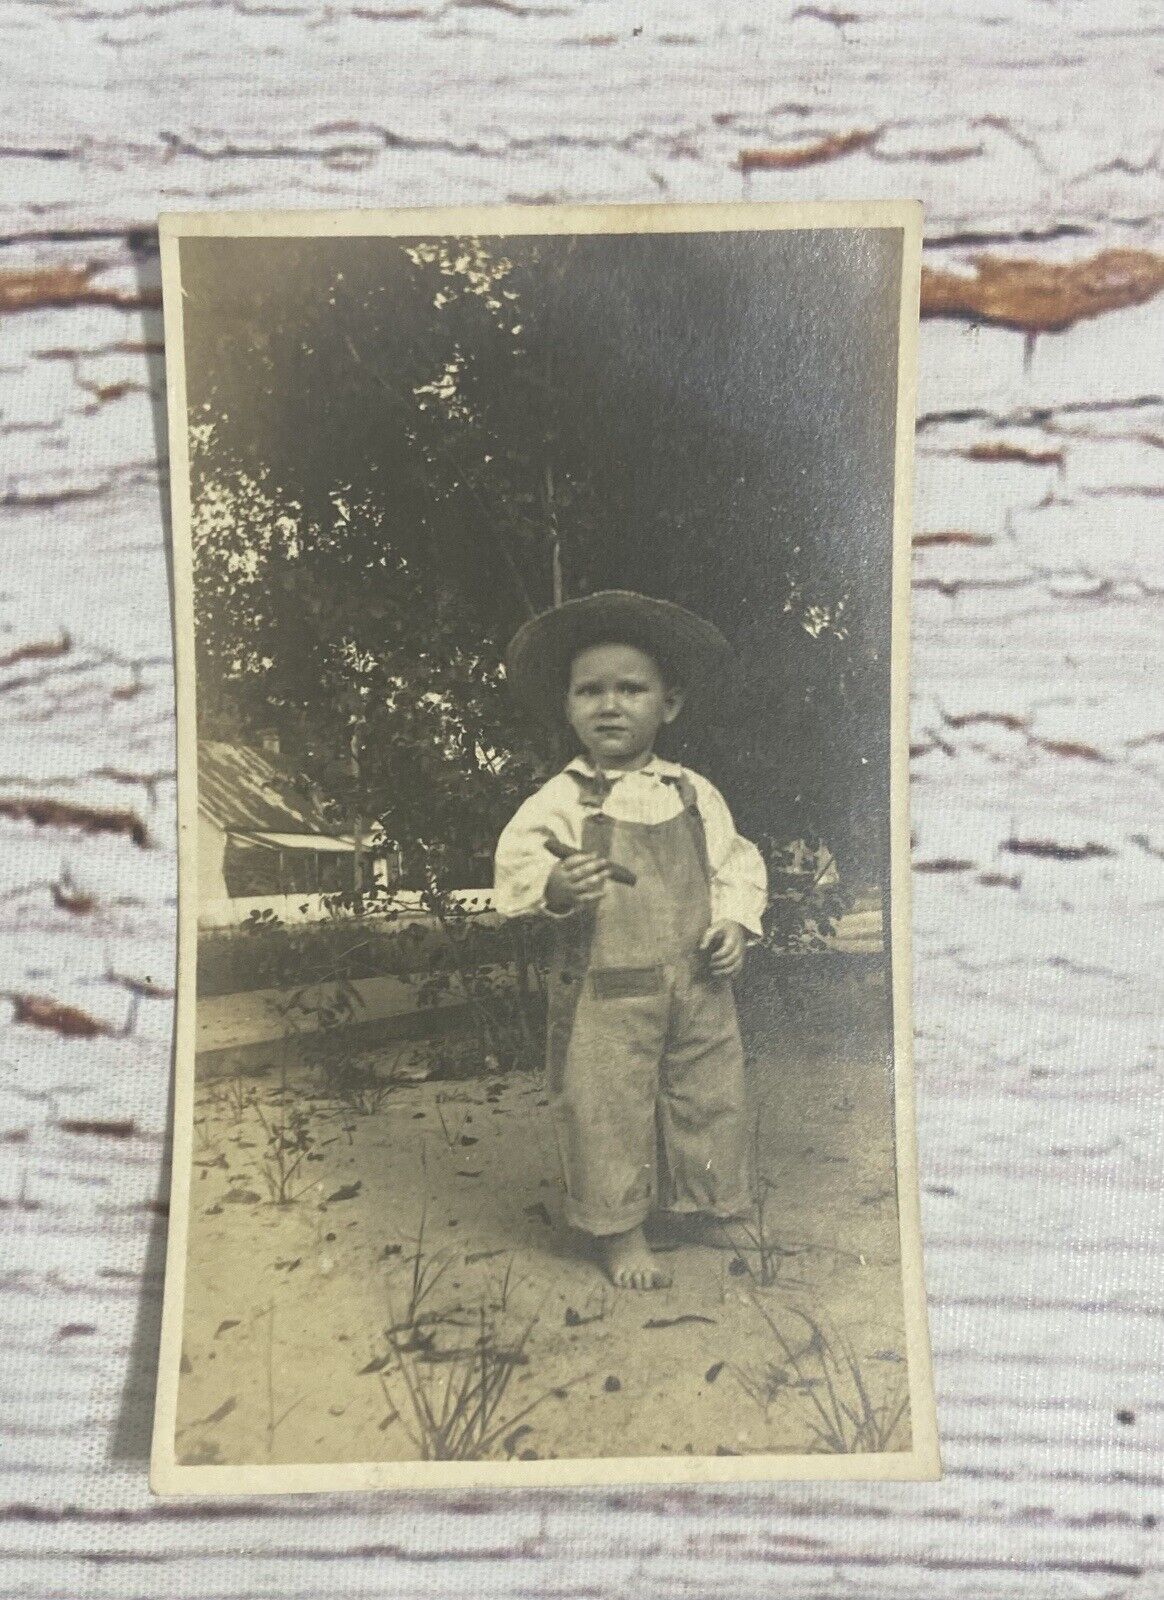 Vintage 1919 Little Southern Boy In Overalls “Made October 12 1919”, 4” x 2.45”